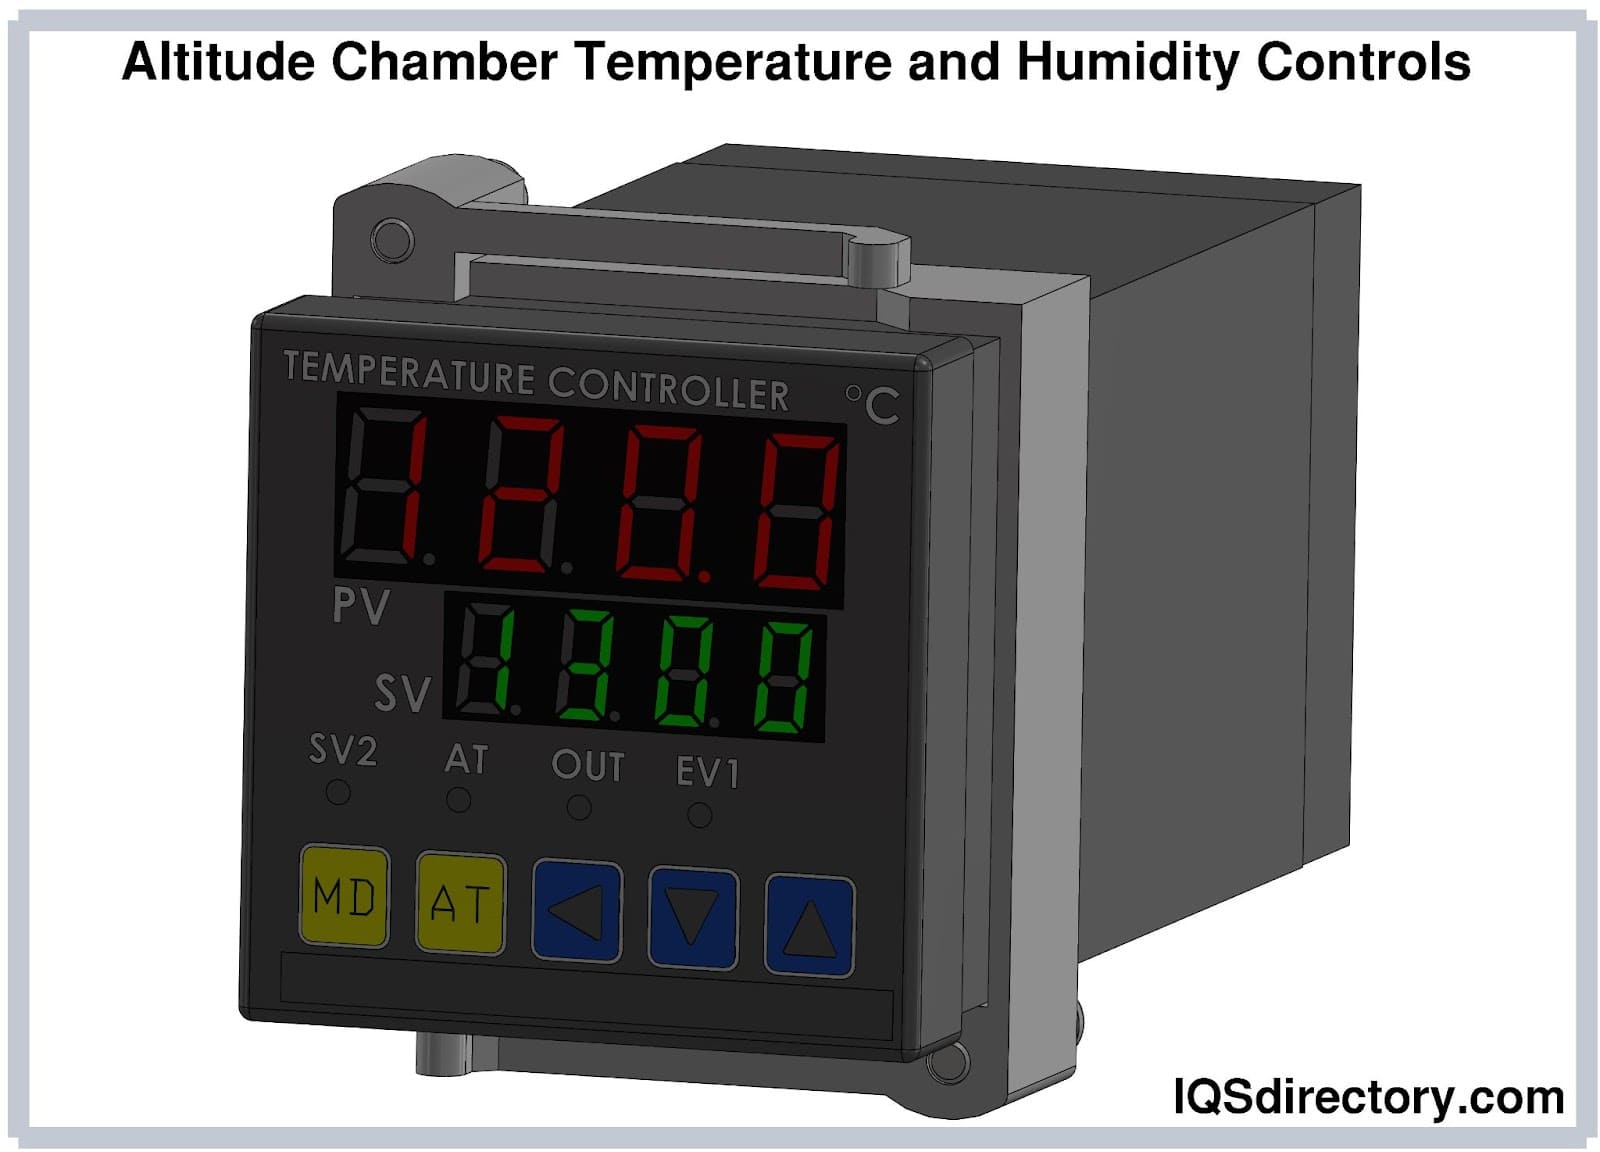 Altitude Chamber Temperature and Humidity Controls